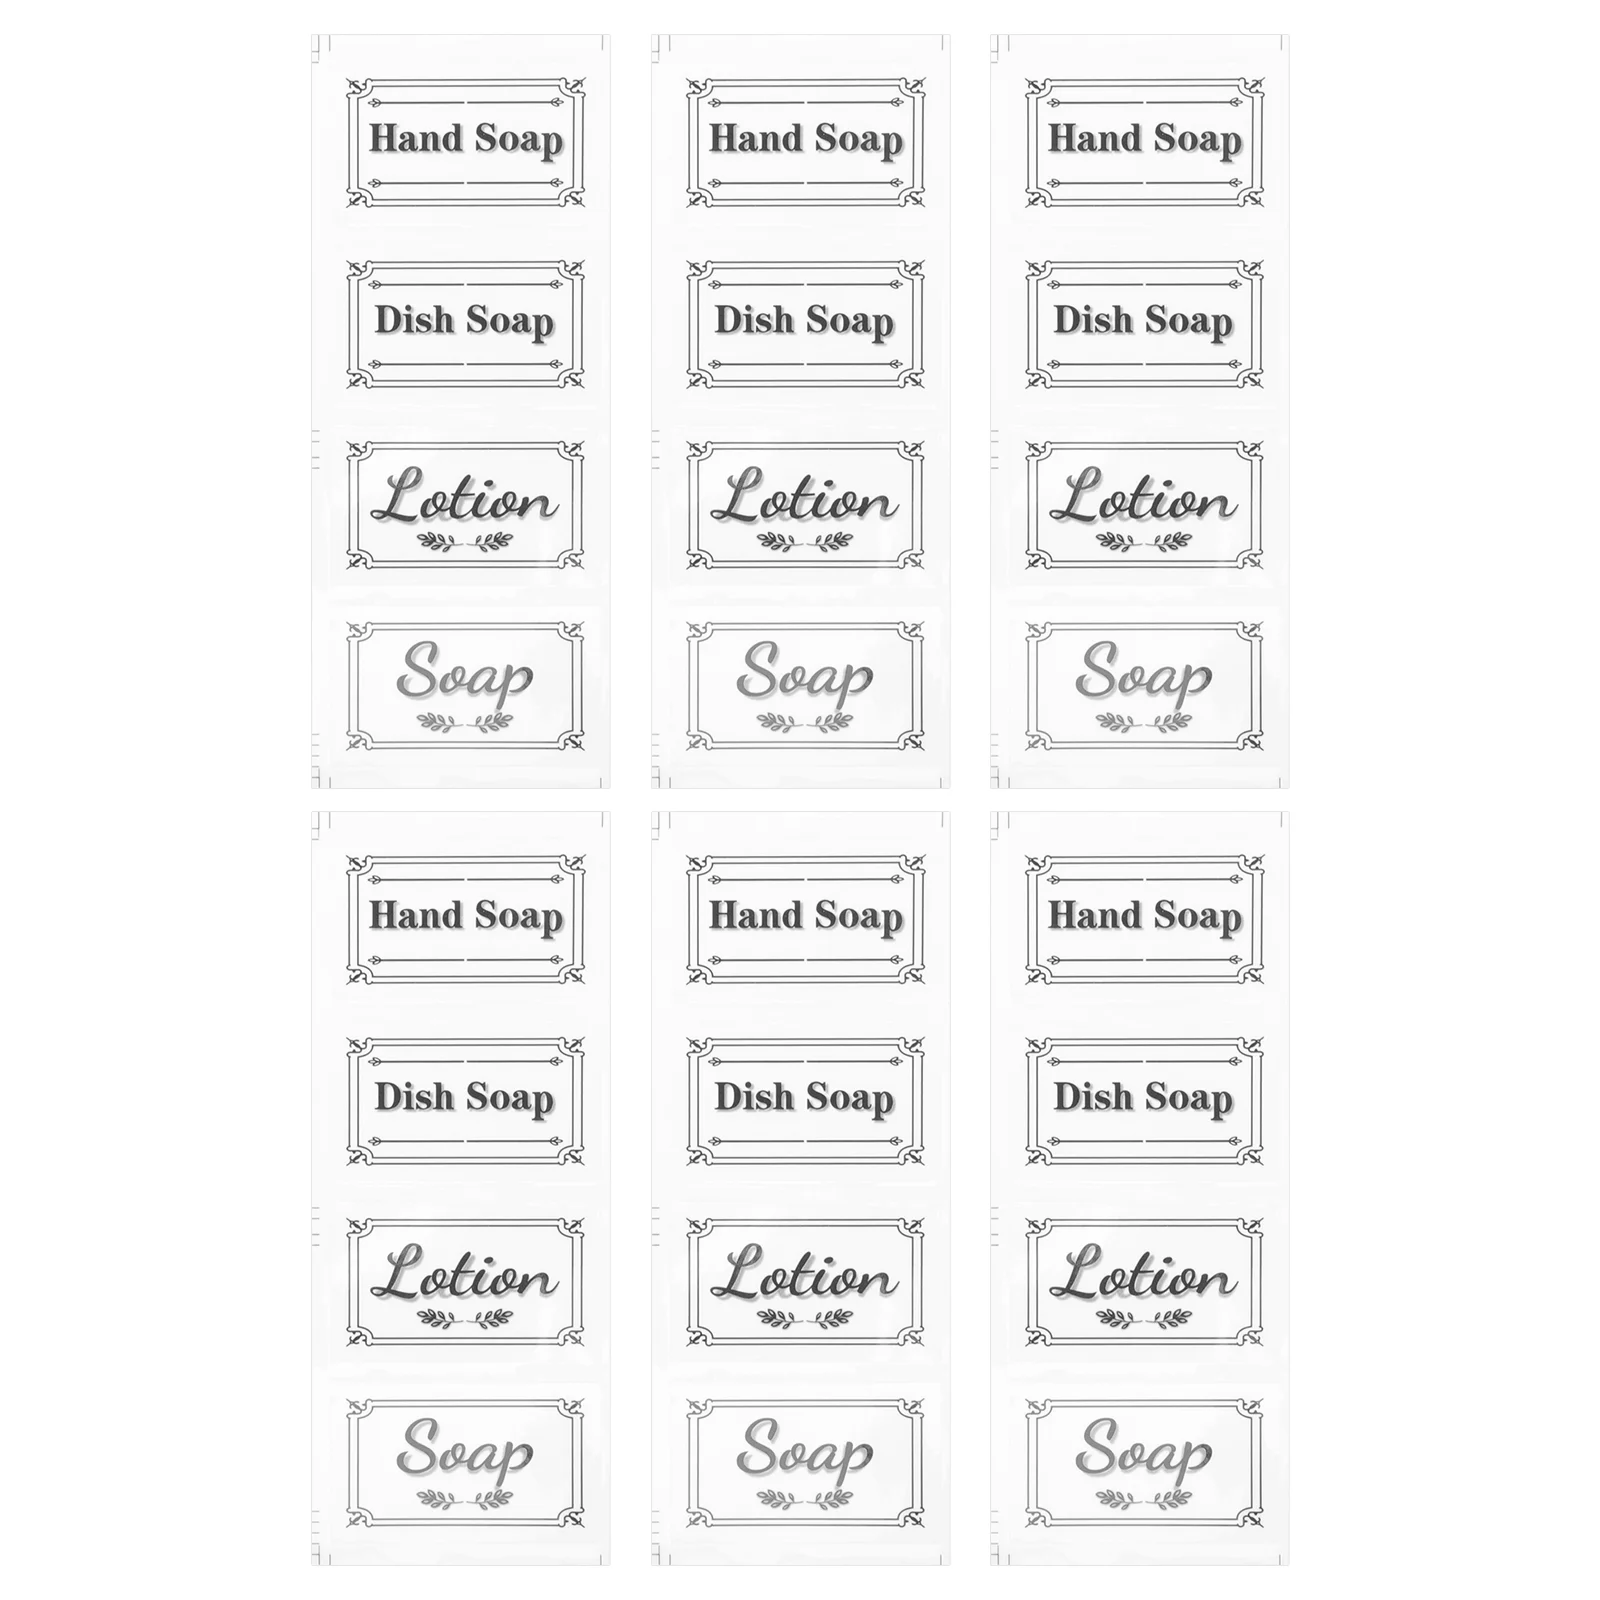 Labels Soap Stickers Label Bottle Waterproof Dispenser Hand Shampoo Bathroom Conditioner Sticker Cleaning Decals Removable